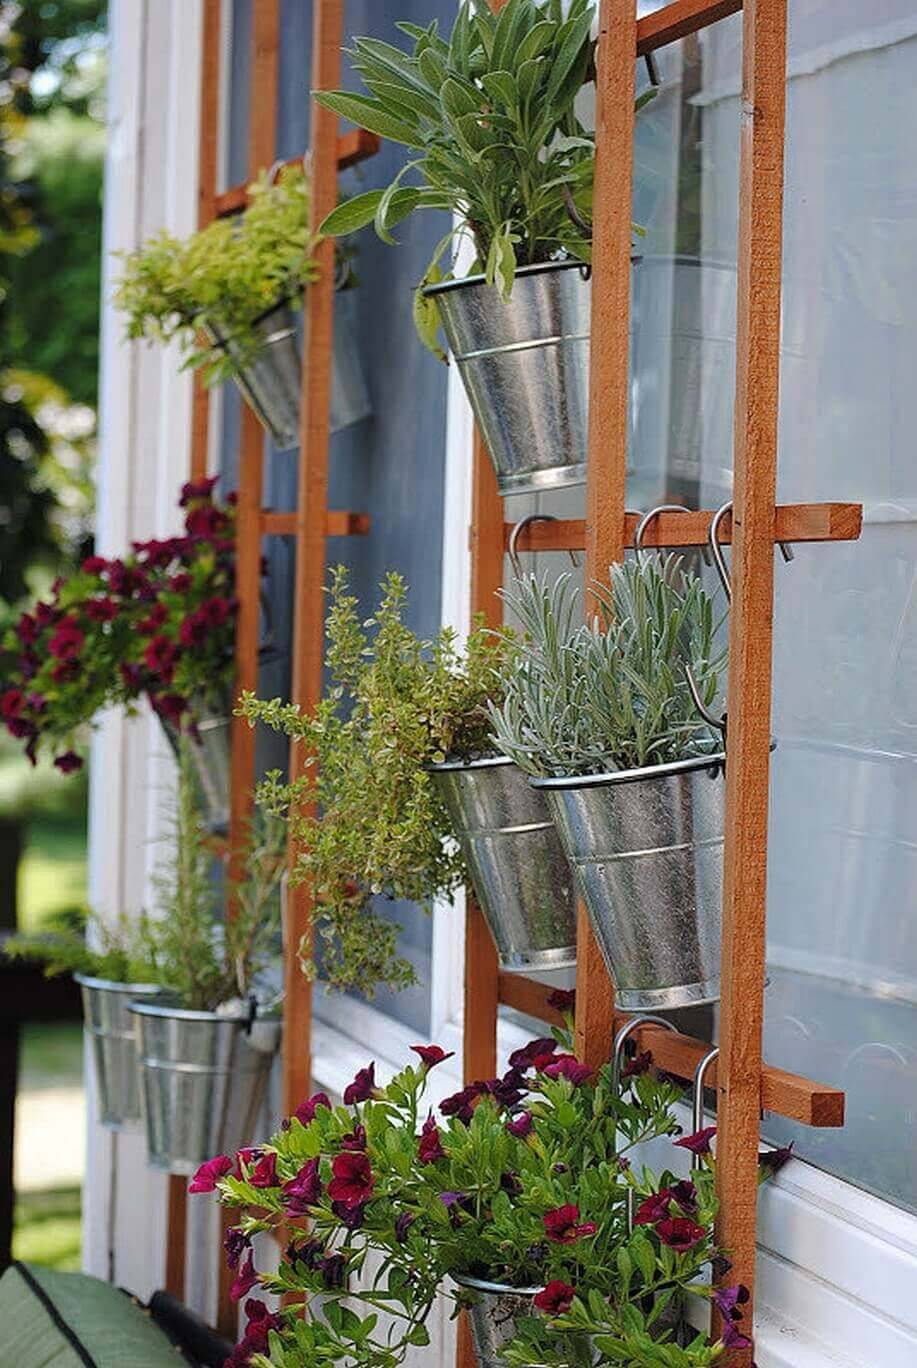 Upcycled Upside Down Hanging Herb Garden